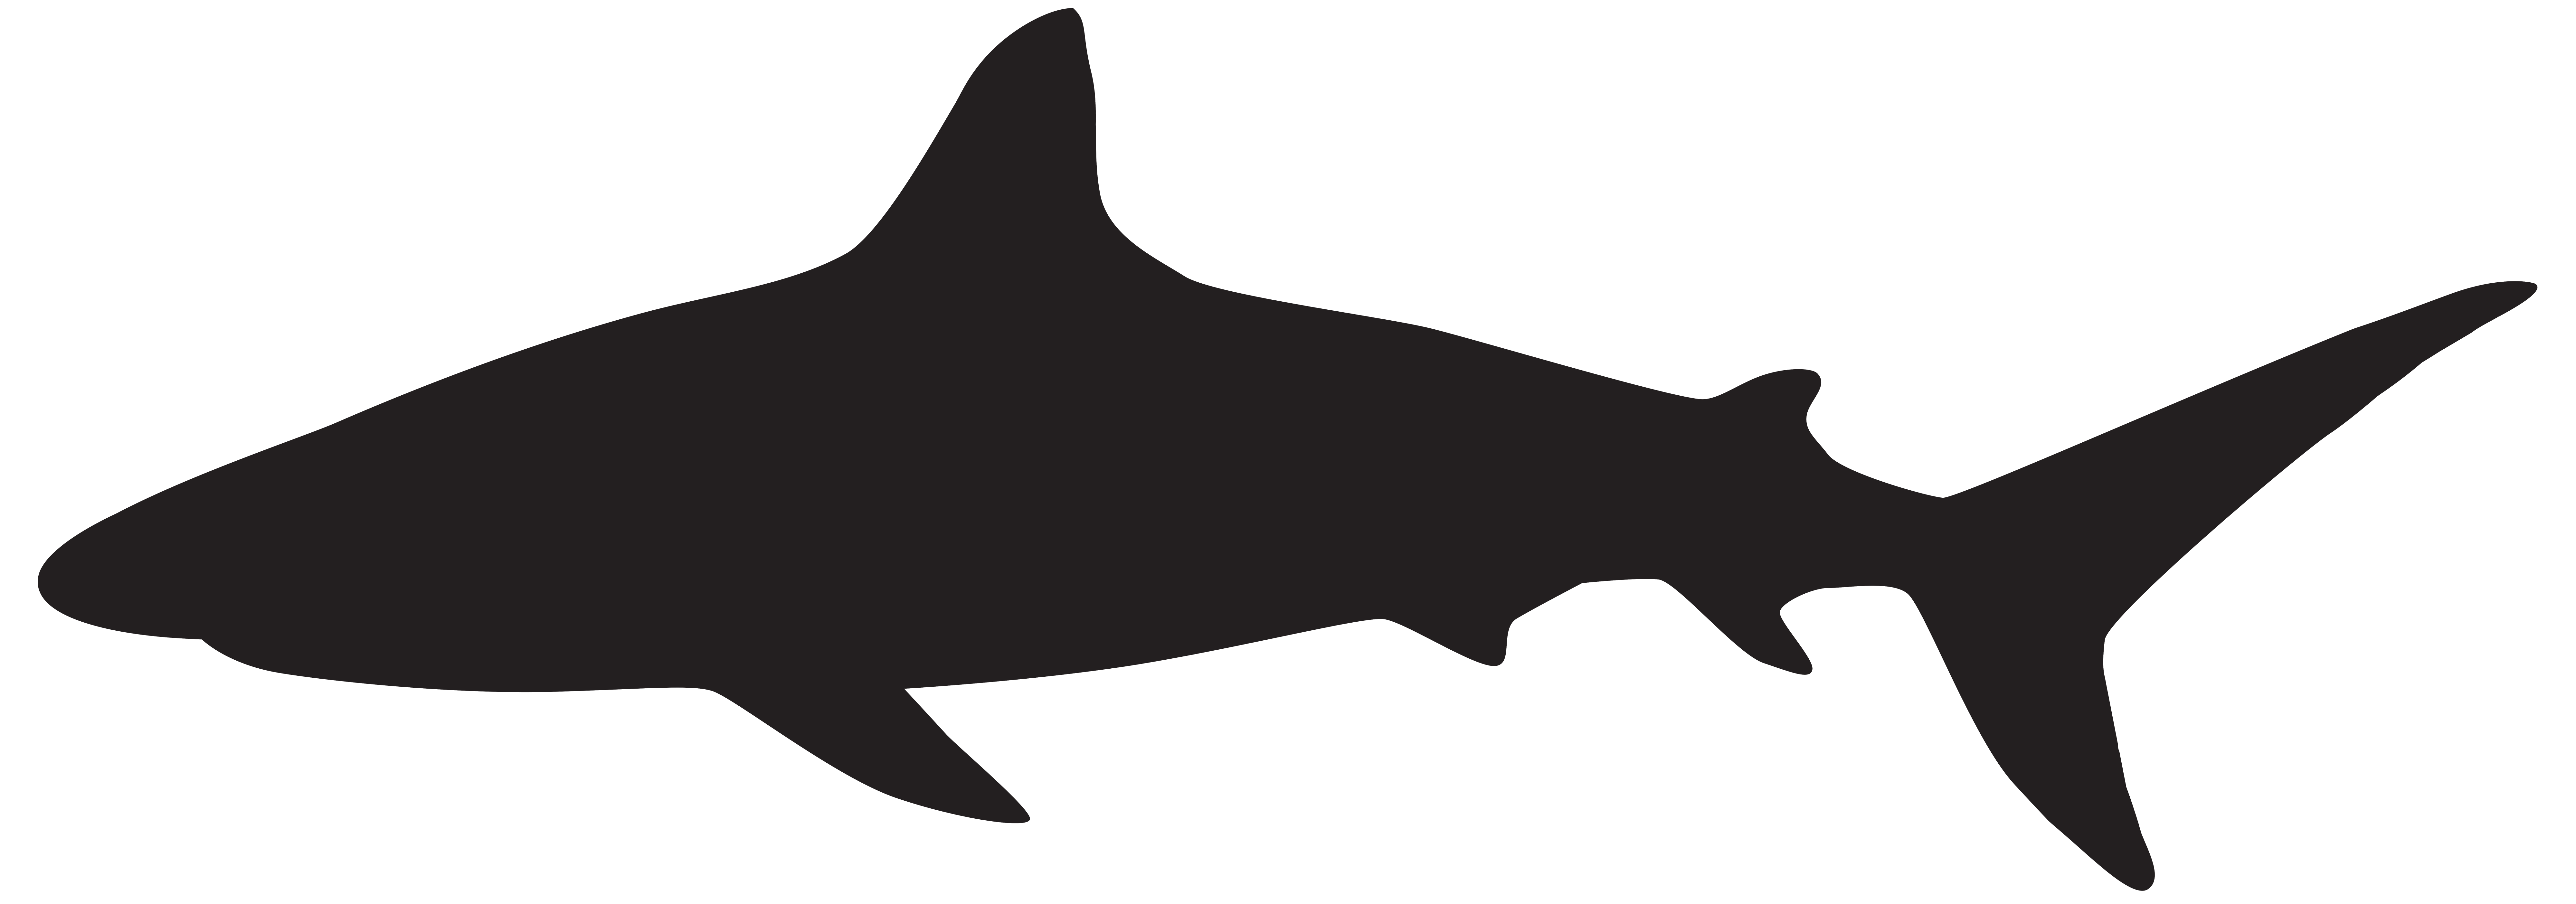 Shark Silhouette PNG Clip Art Image | Gallery Yopriceville - High ...